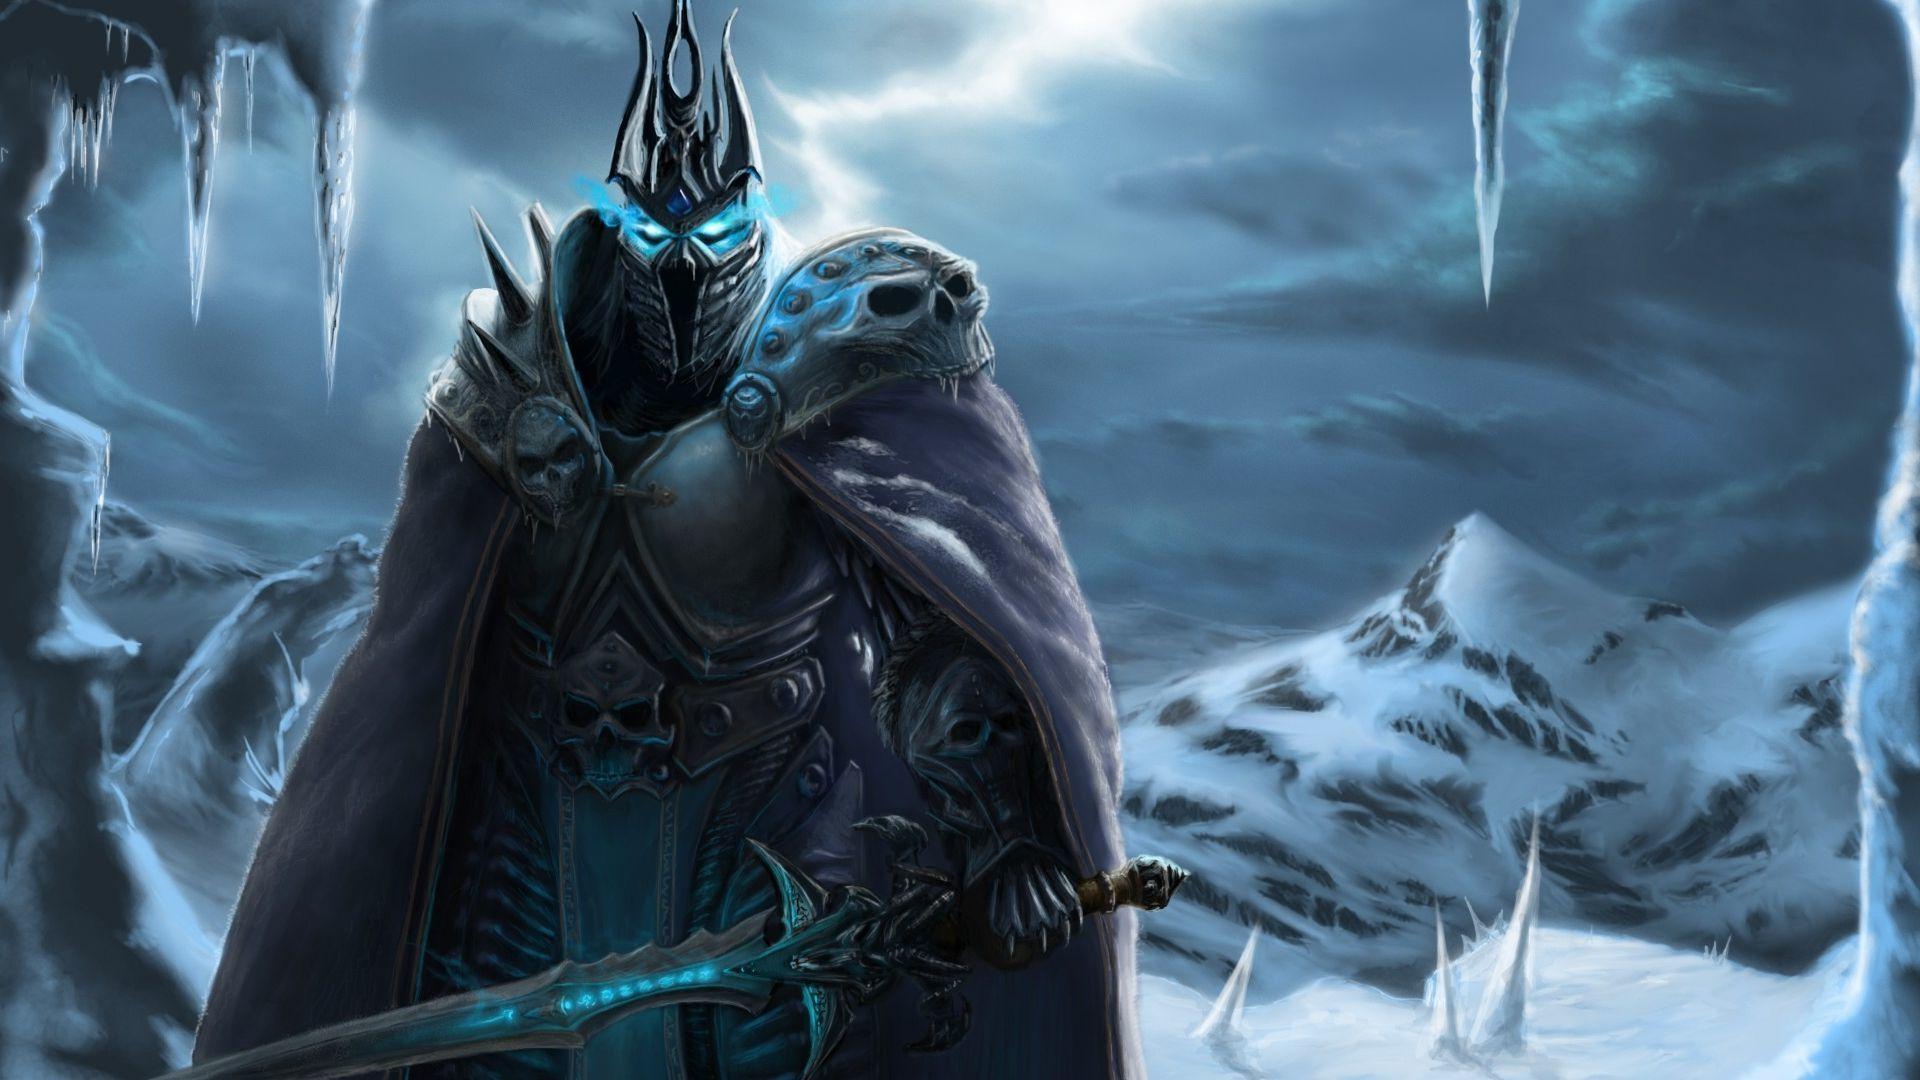 World Of Warcraft: Wrath Of The Lich King HD Wallpaper 10 X